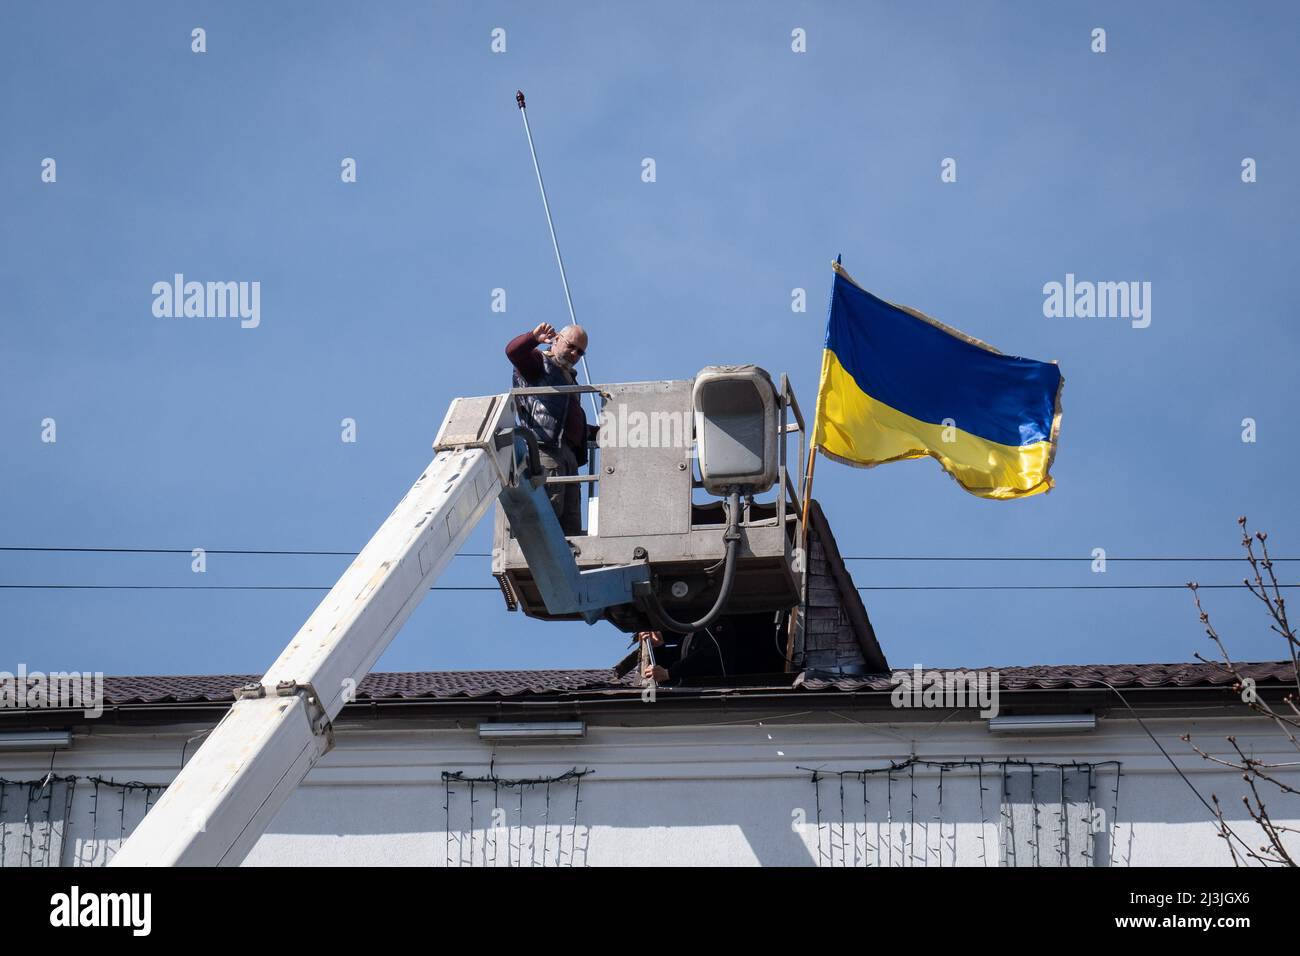 Bucha, Ukraine. 07th Apr, 2022. A man raising up the Ukrainian National Flag in Bucha City Council at Bucha, Kyiv Oblast. Following the recapture of Bucha by the Ukrainian forces, the city was devastated under intense fighting and shelling, as the Russian forces are said to have killed hundreds of civilians in the town. Credit: SOPA Images Limited/Alamy Live News Stock Photo